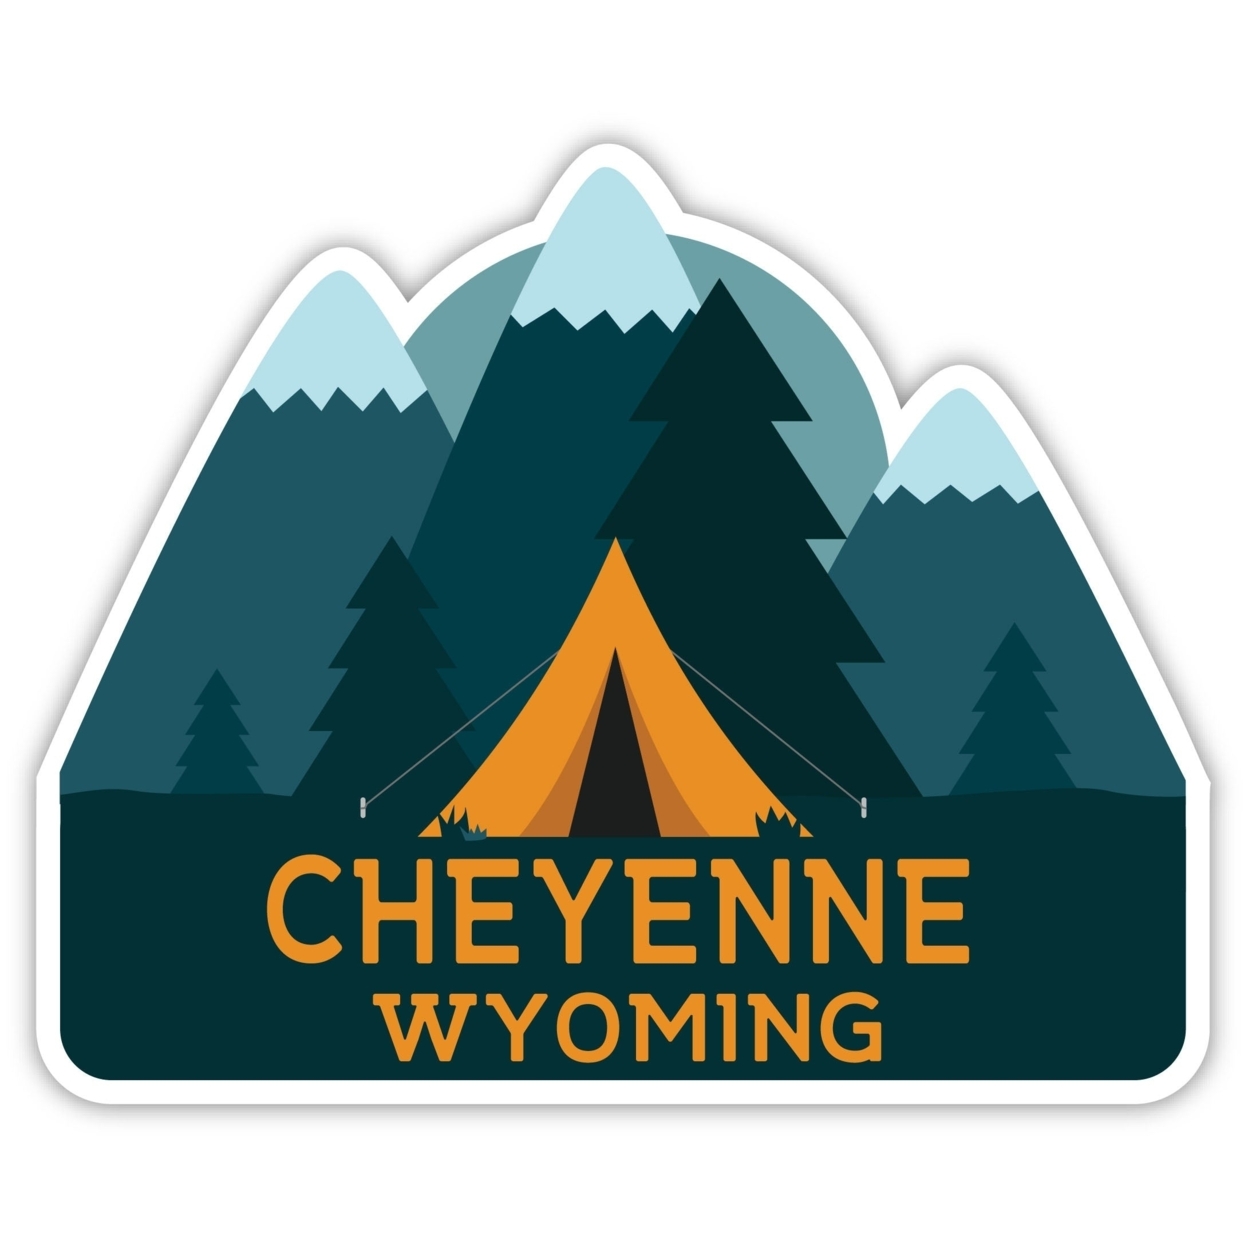 Cheyenne Wyoming Souvenir Decorative Stickers (Choose Theme And Size) - Single Unit, 8-Inch, Tent